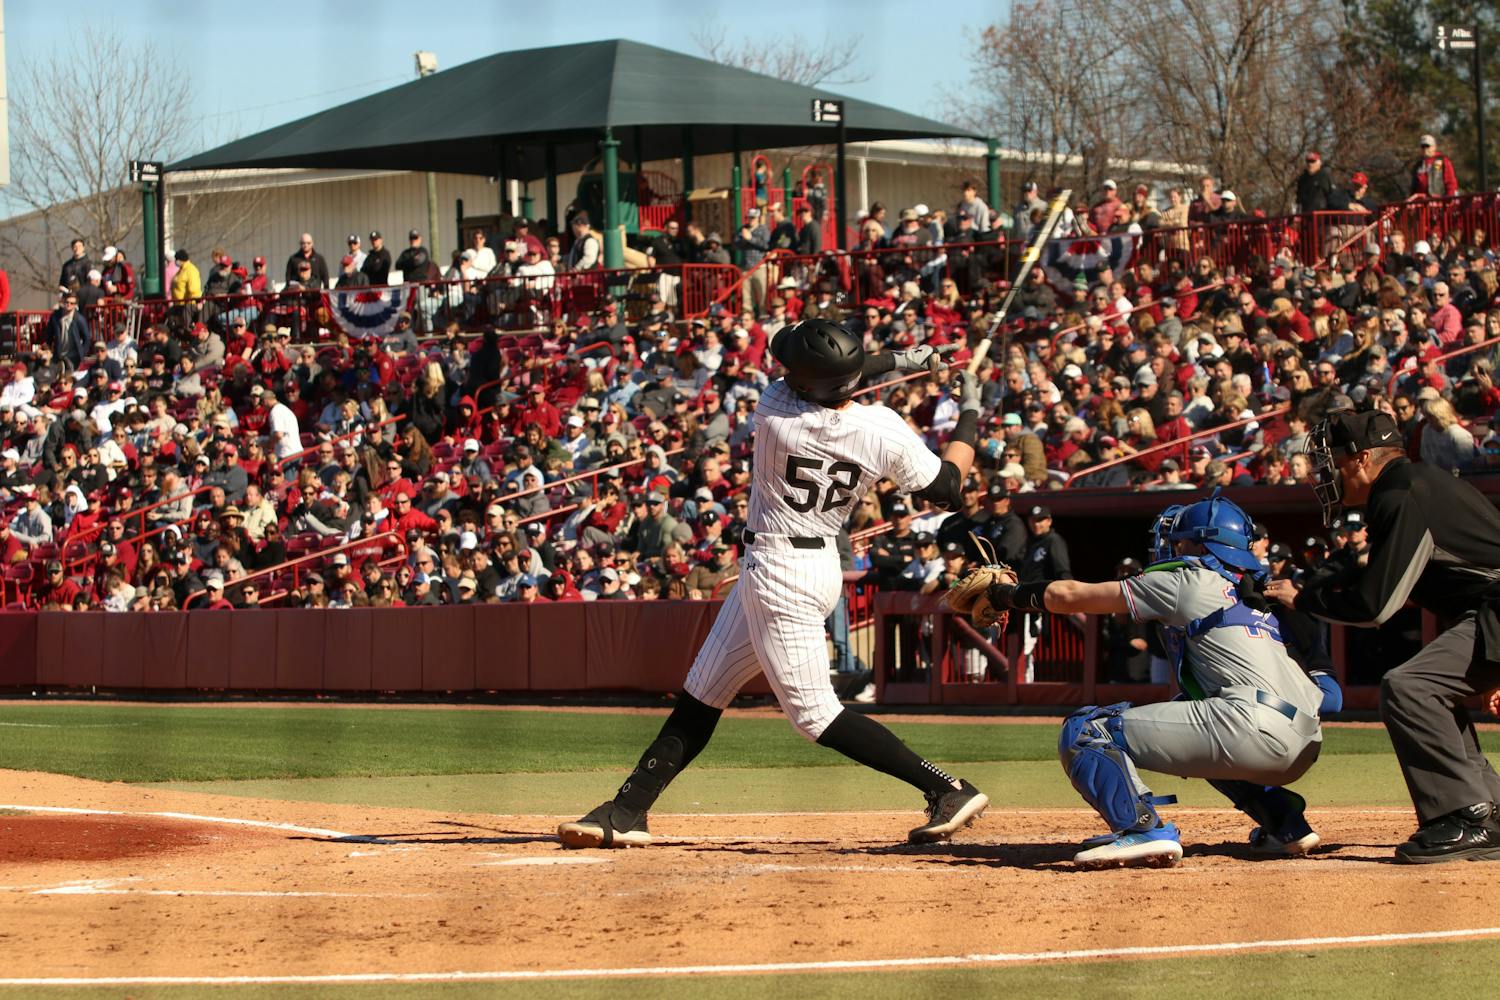 FILE — Junior first baseman Gavin Casas takes a strike against UMass Lowell at Founders Park on Feb. 18, 2023. Casas put up 1 of the Gamecocks' 17 points this game against the River Hawks' 1 point.&nbsp;